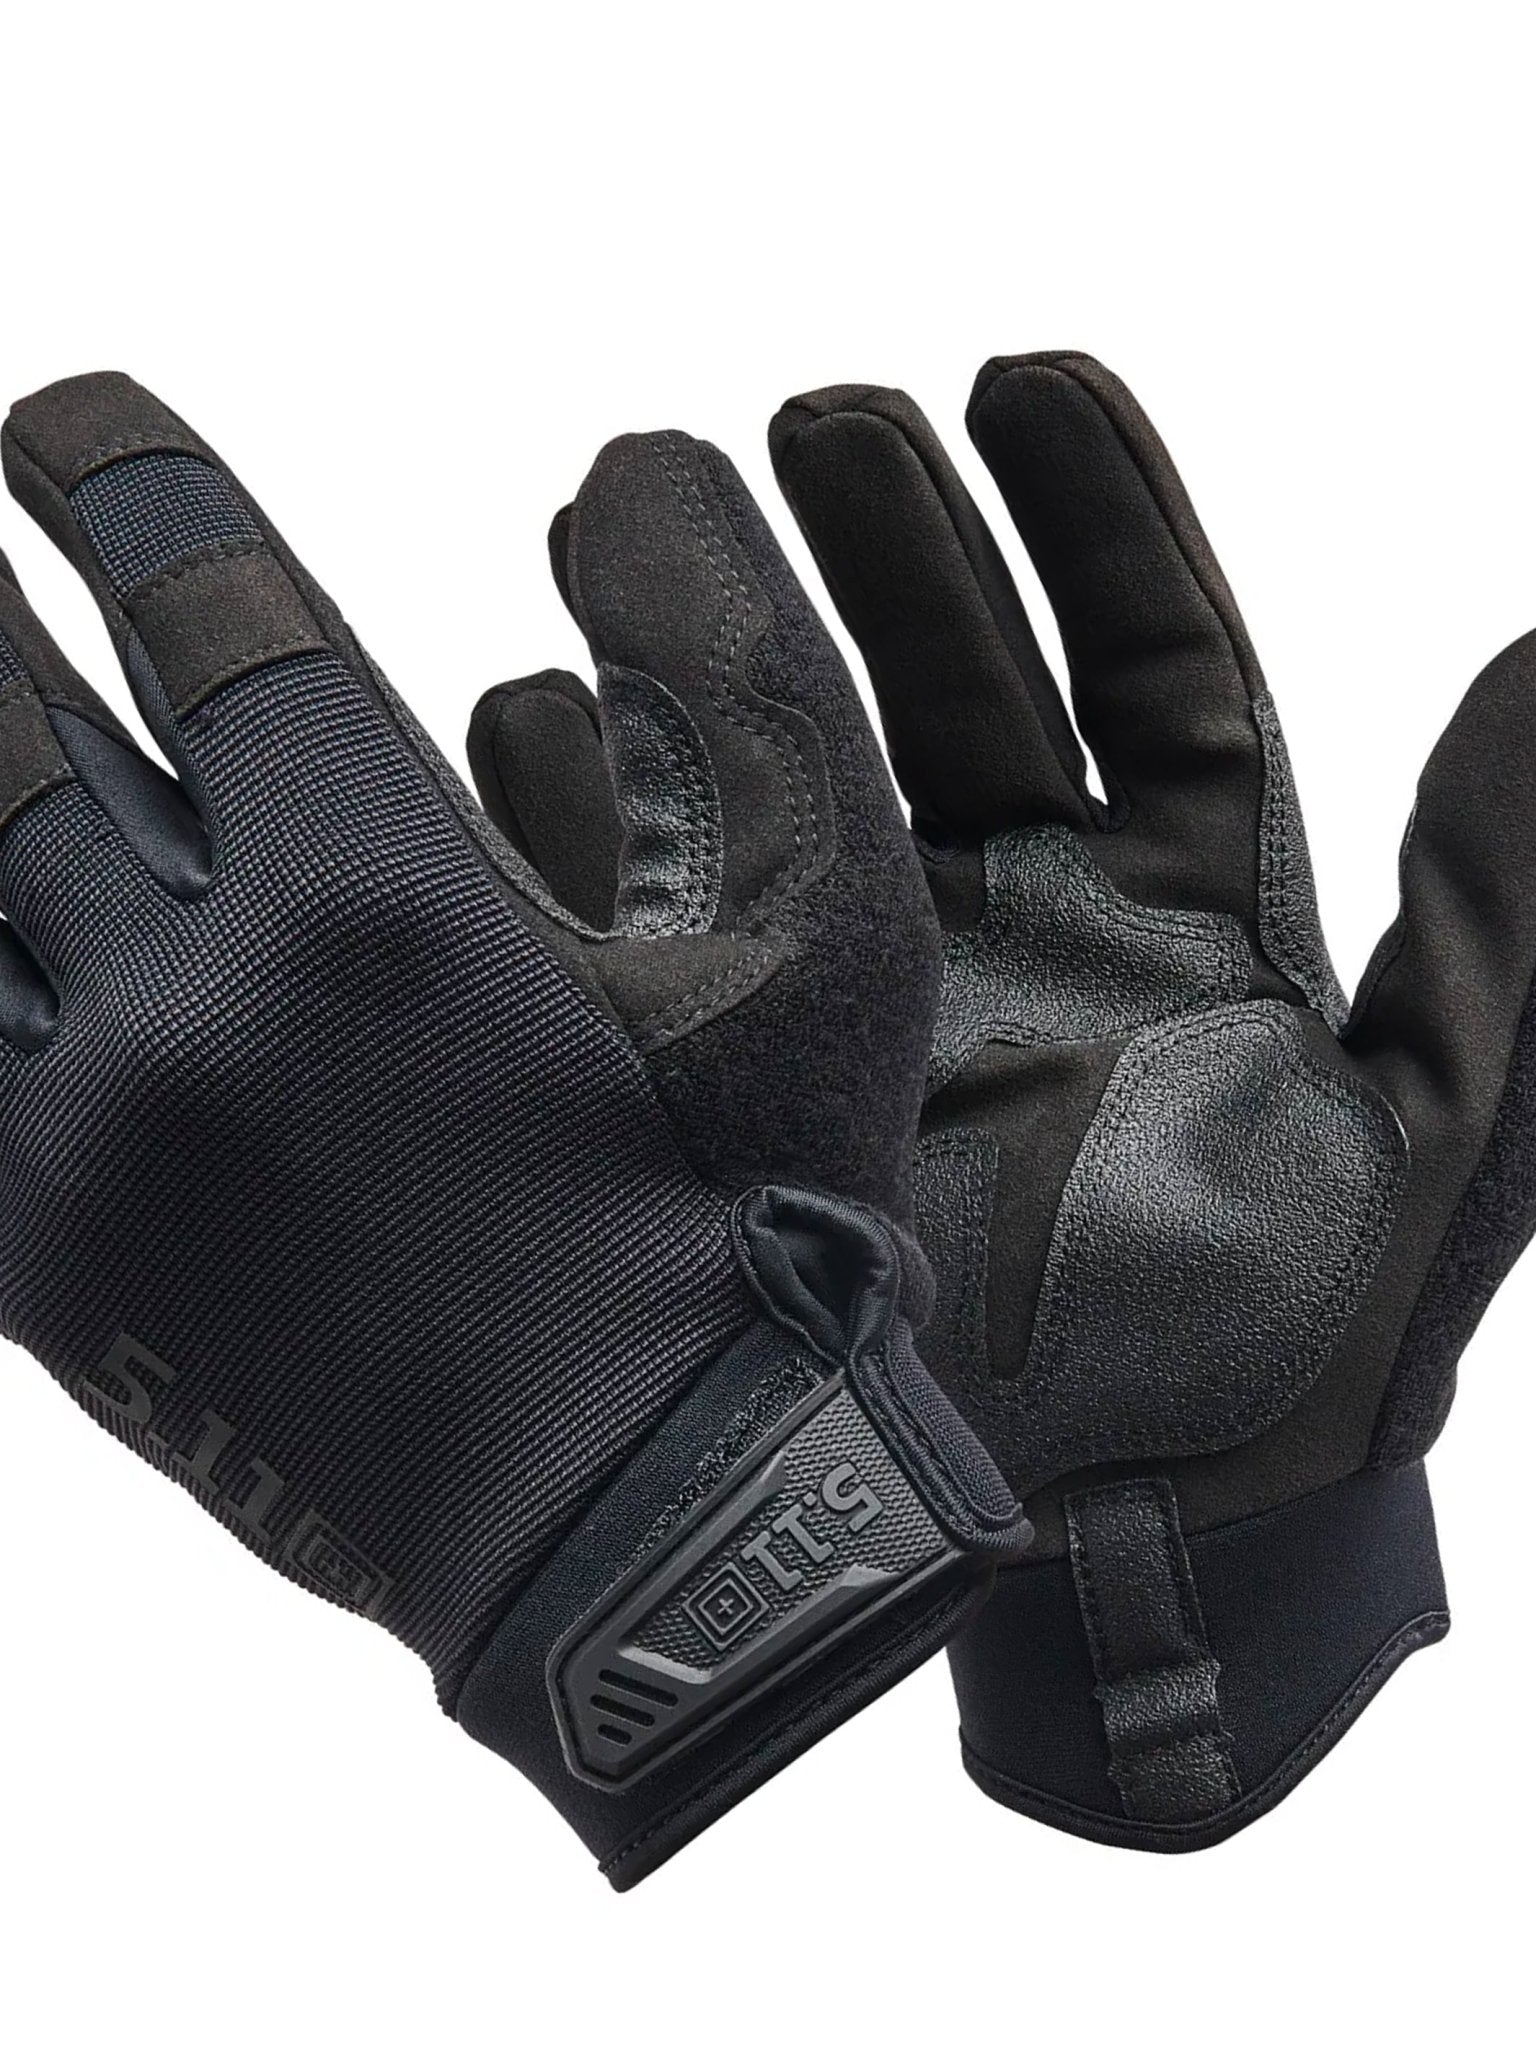 4elementsclothing5.11 Tactical5.11 Tactical - 5.11 TAC A4 Glove - Touchscreen synthetic suede pal, with grip gloves, Nylon TAA Compliant - EN388:2016 - 2121X; EN ISO 21420 - Style 59380Gloves59380-019-S